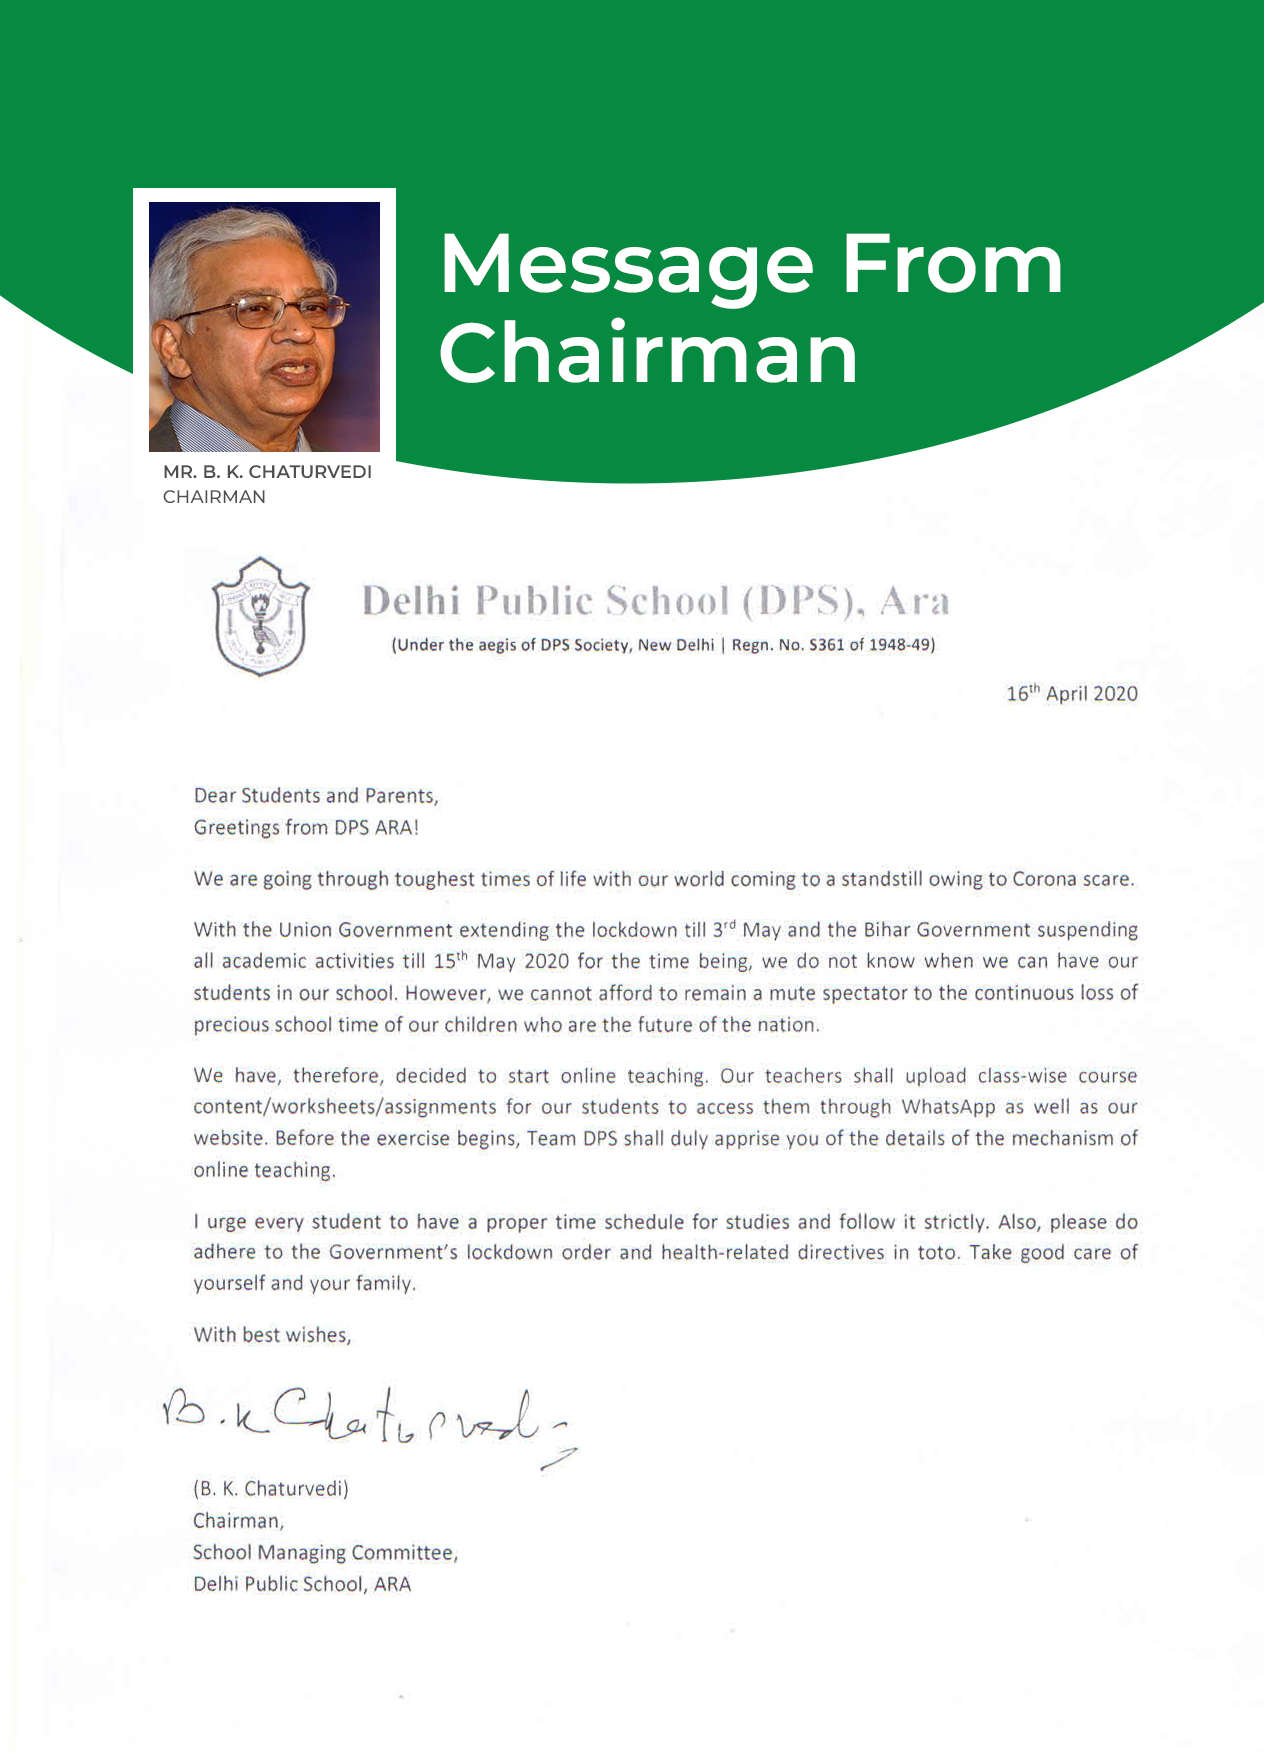 MESSAGE FROM CHAIRMAN